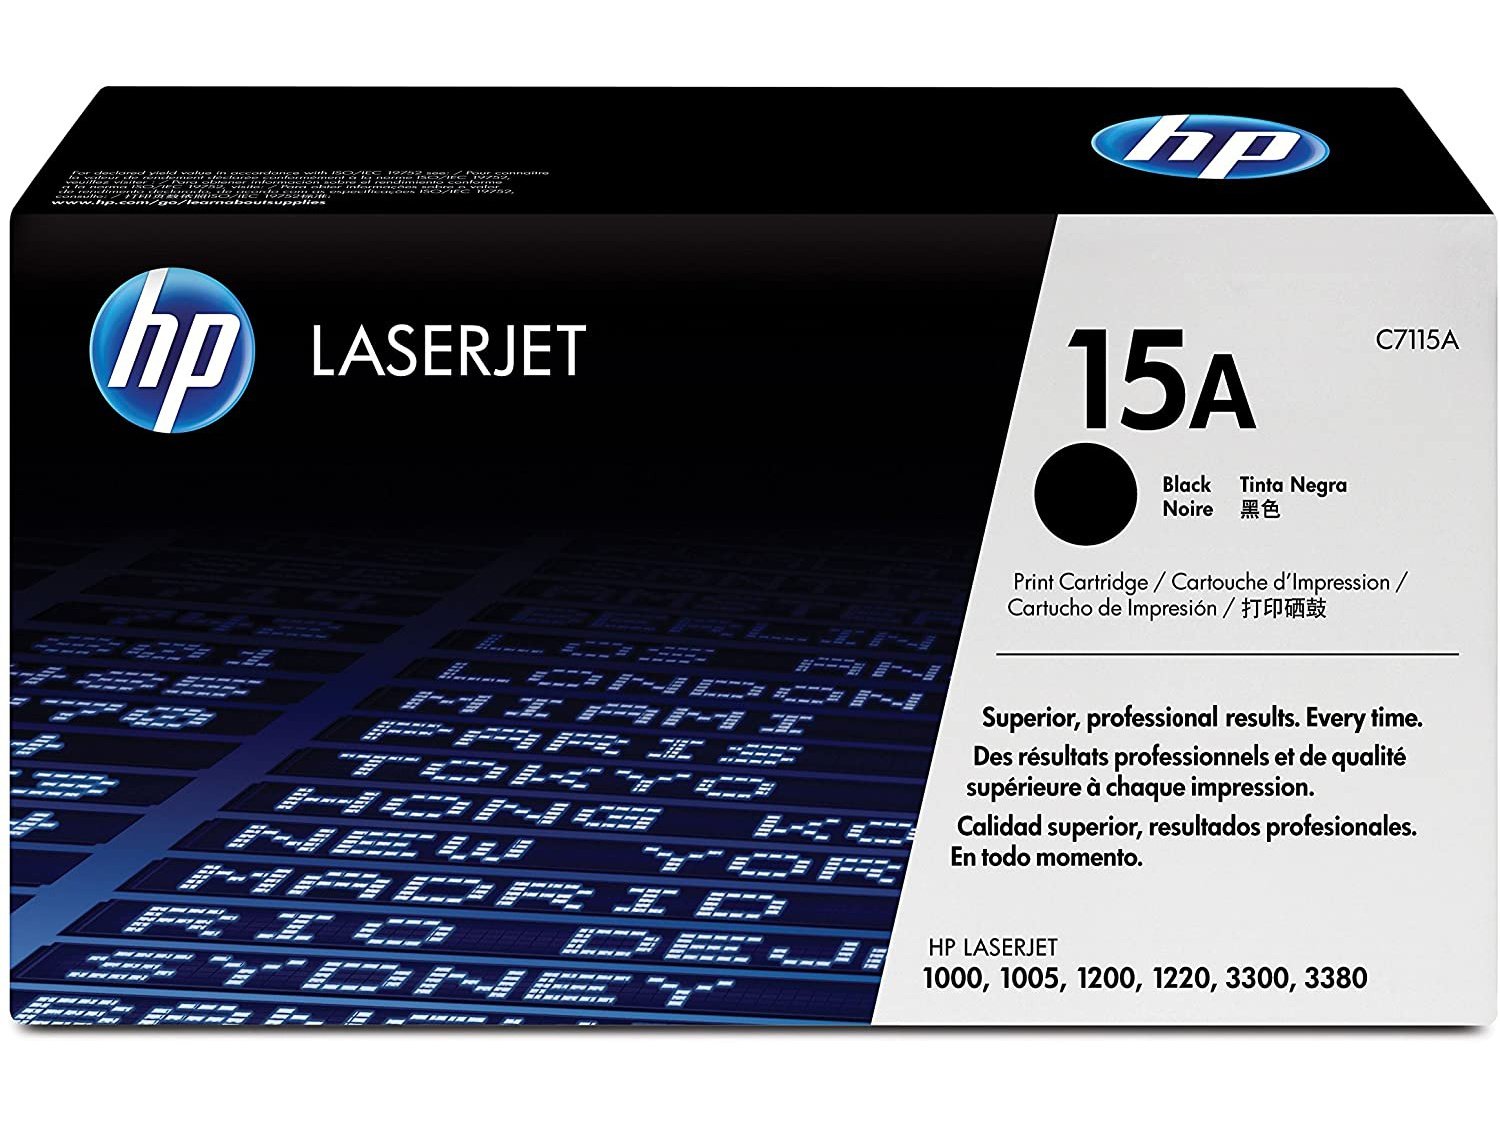 ICU OEM Get HP ICUC7115A Yields 2,500 Pages 15A Black Laser Toner Cartridge - Ink Cartridges USA